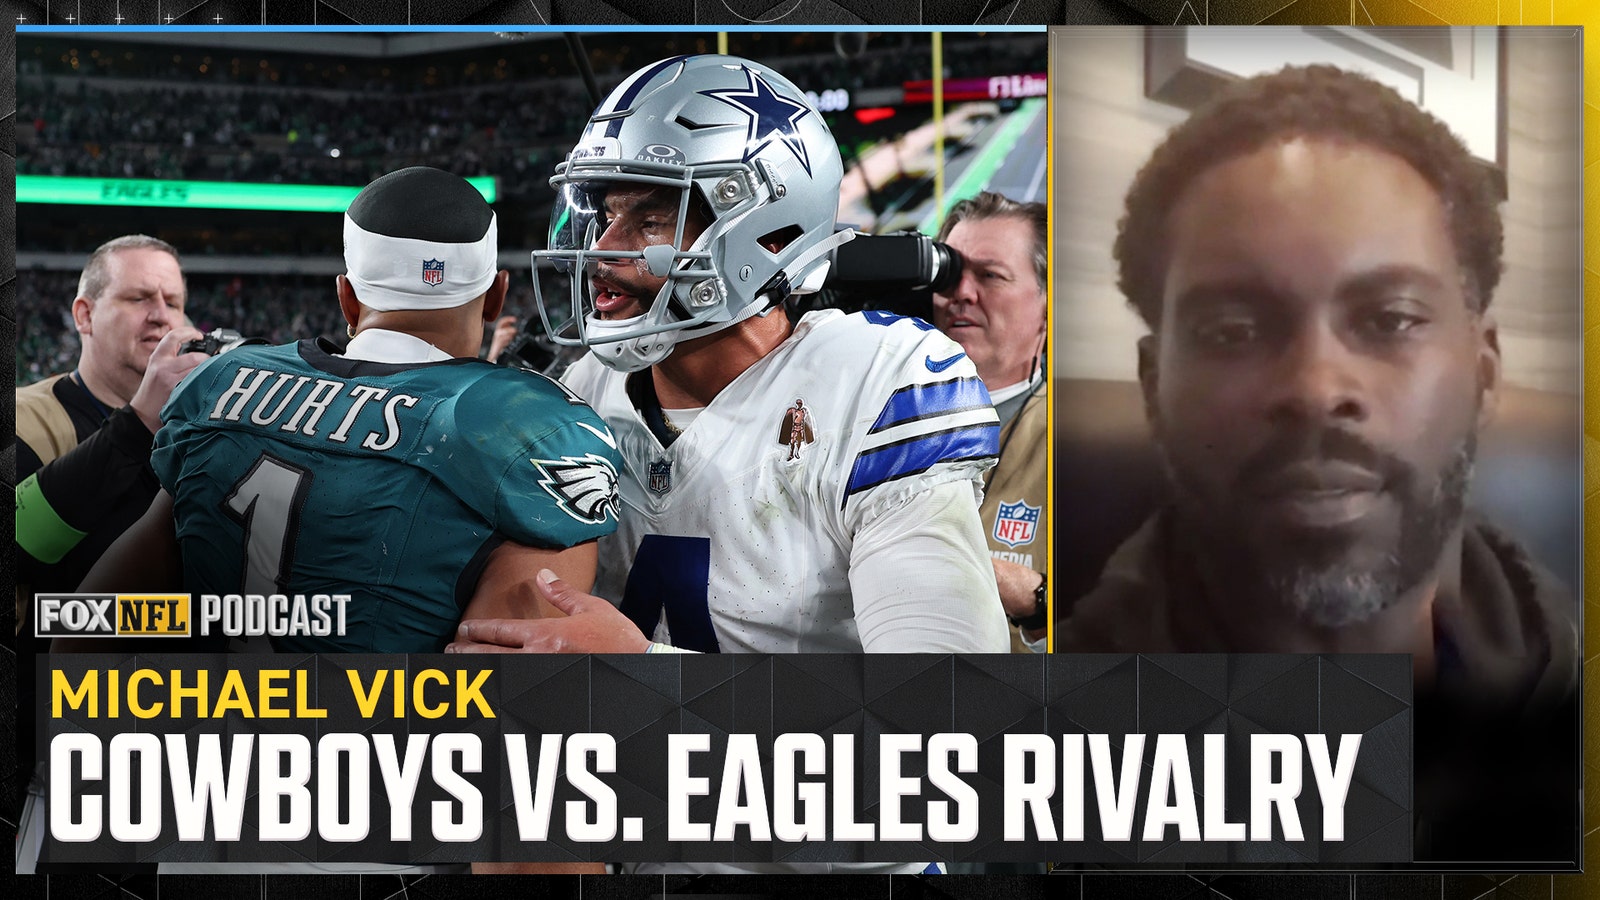 Michael Vick on what makes the Cowboys vs. Eagles rivalry special